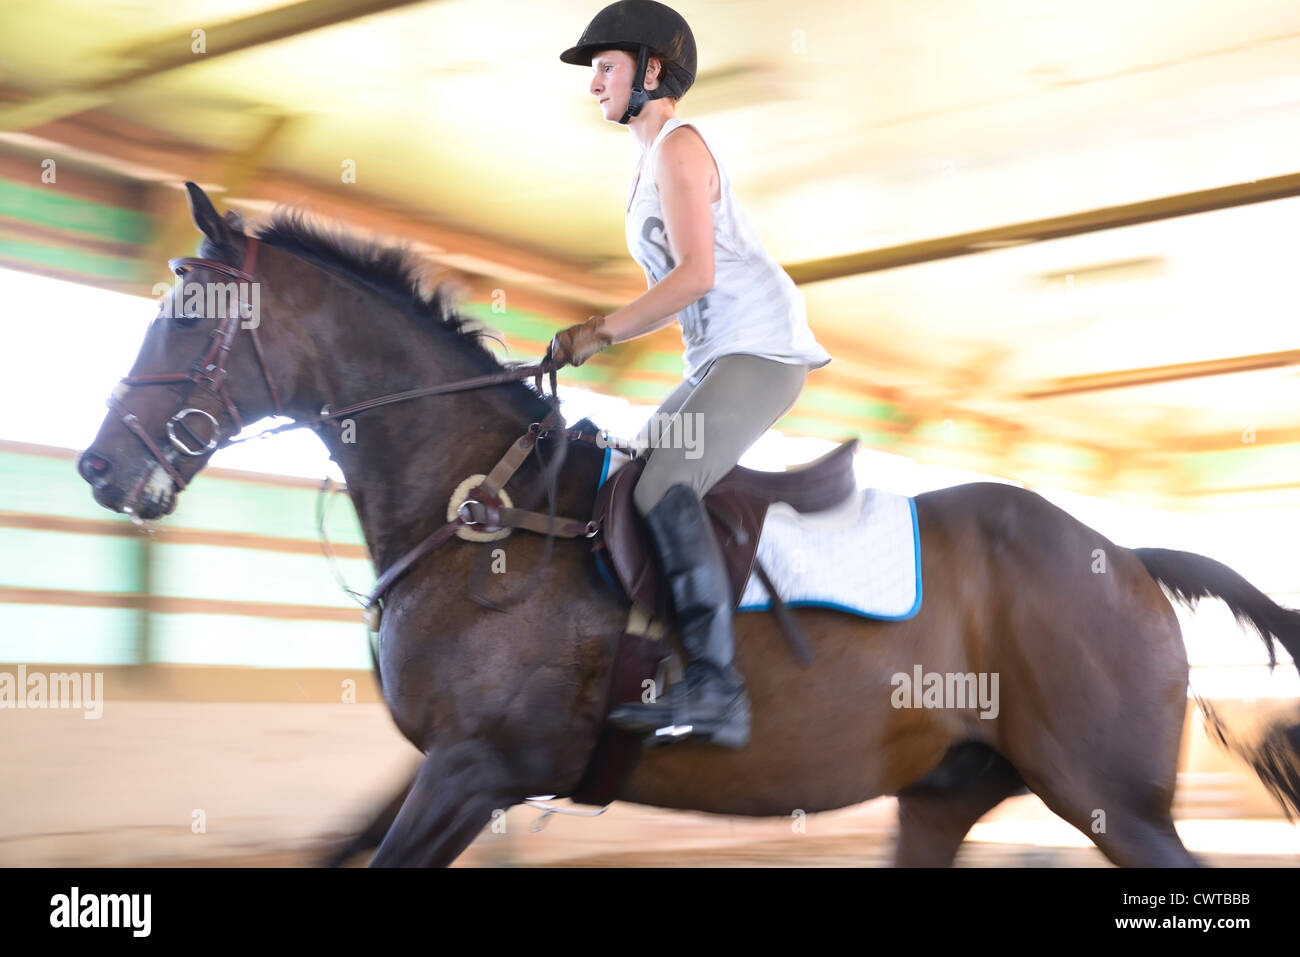 Female rider landing a jump during riding lessons in indoor arena Stock Photo